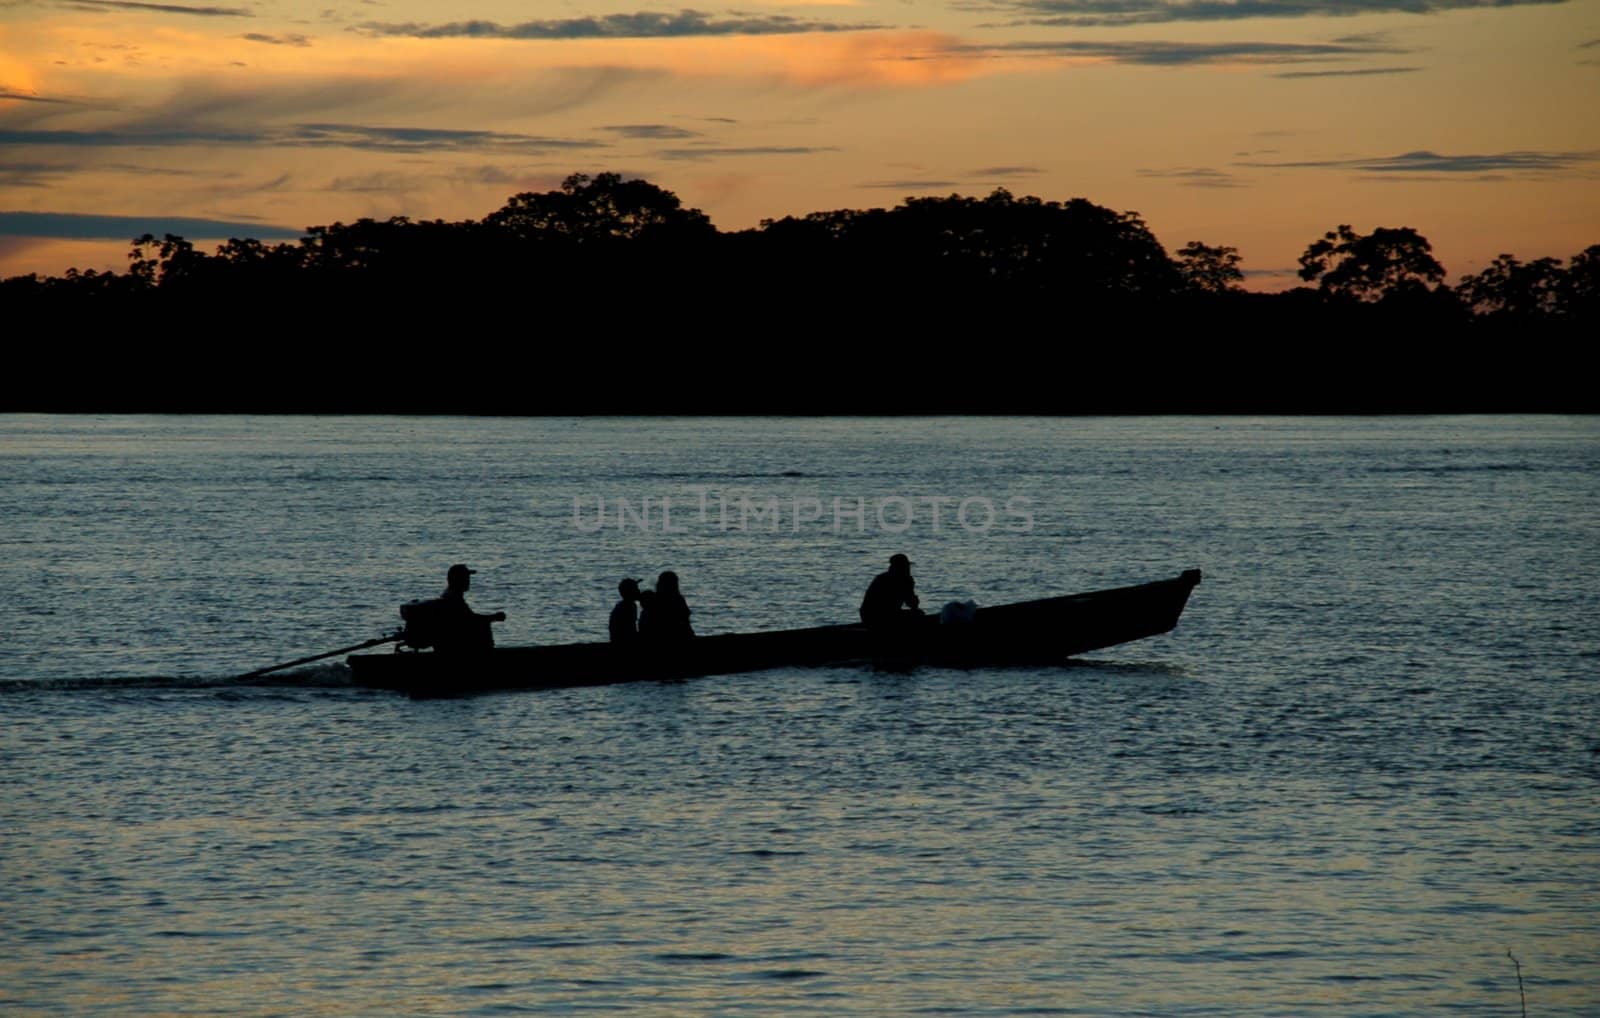 Early morning boat leaving to catch fish in Amazon